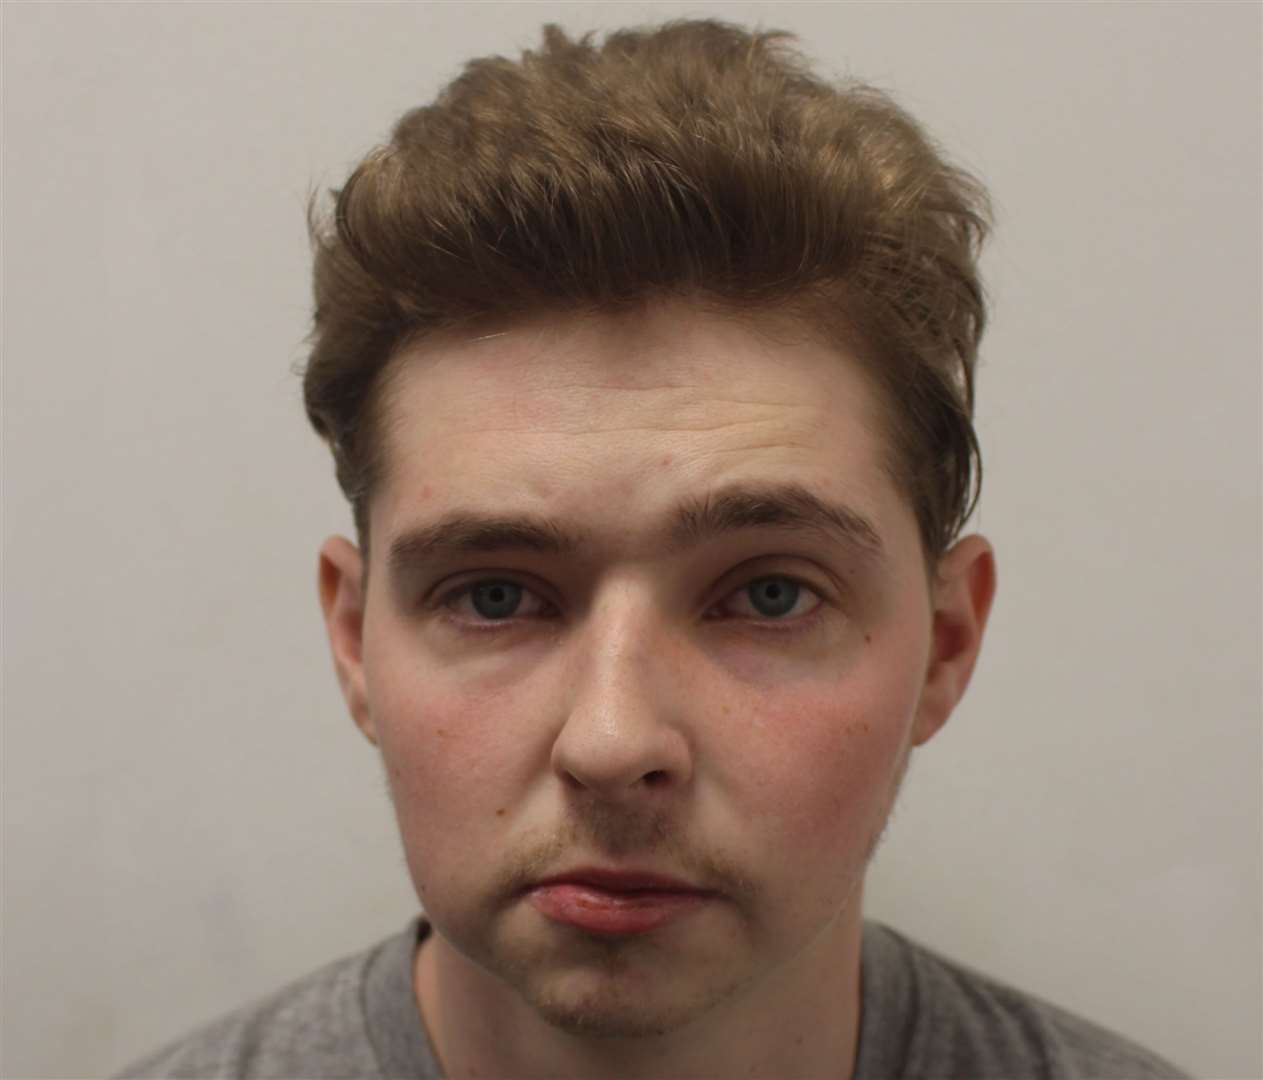 James Bainbridge of Harslock Drive, Abbey Wood in Bexley, has been jailed for child sex offences. Picture: Met Police (54528104)